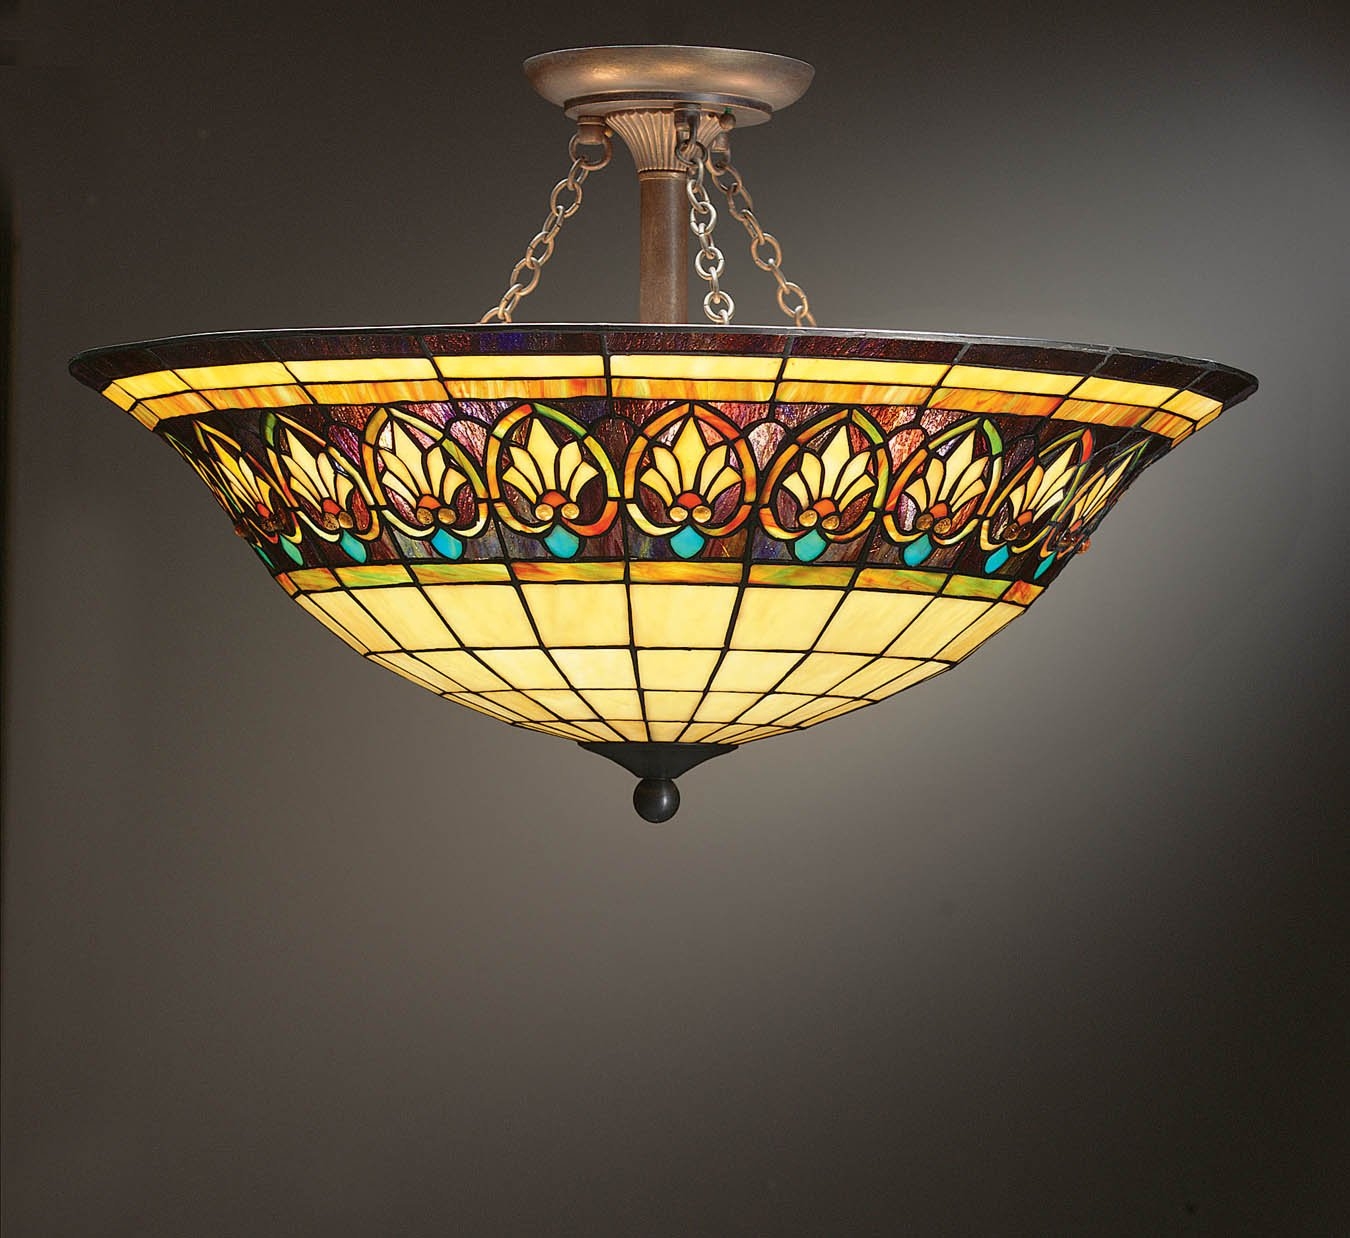 Dale Tiffany Ceiling Light Fixtures